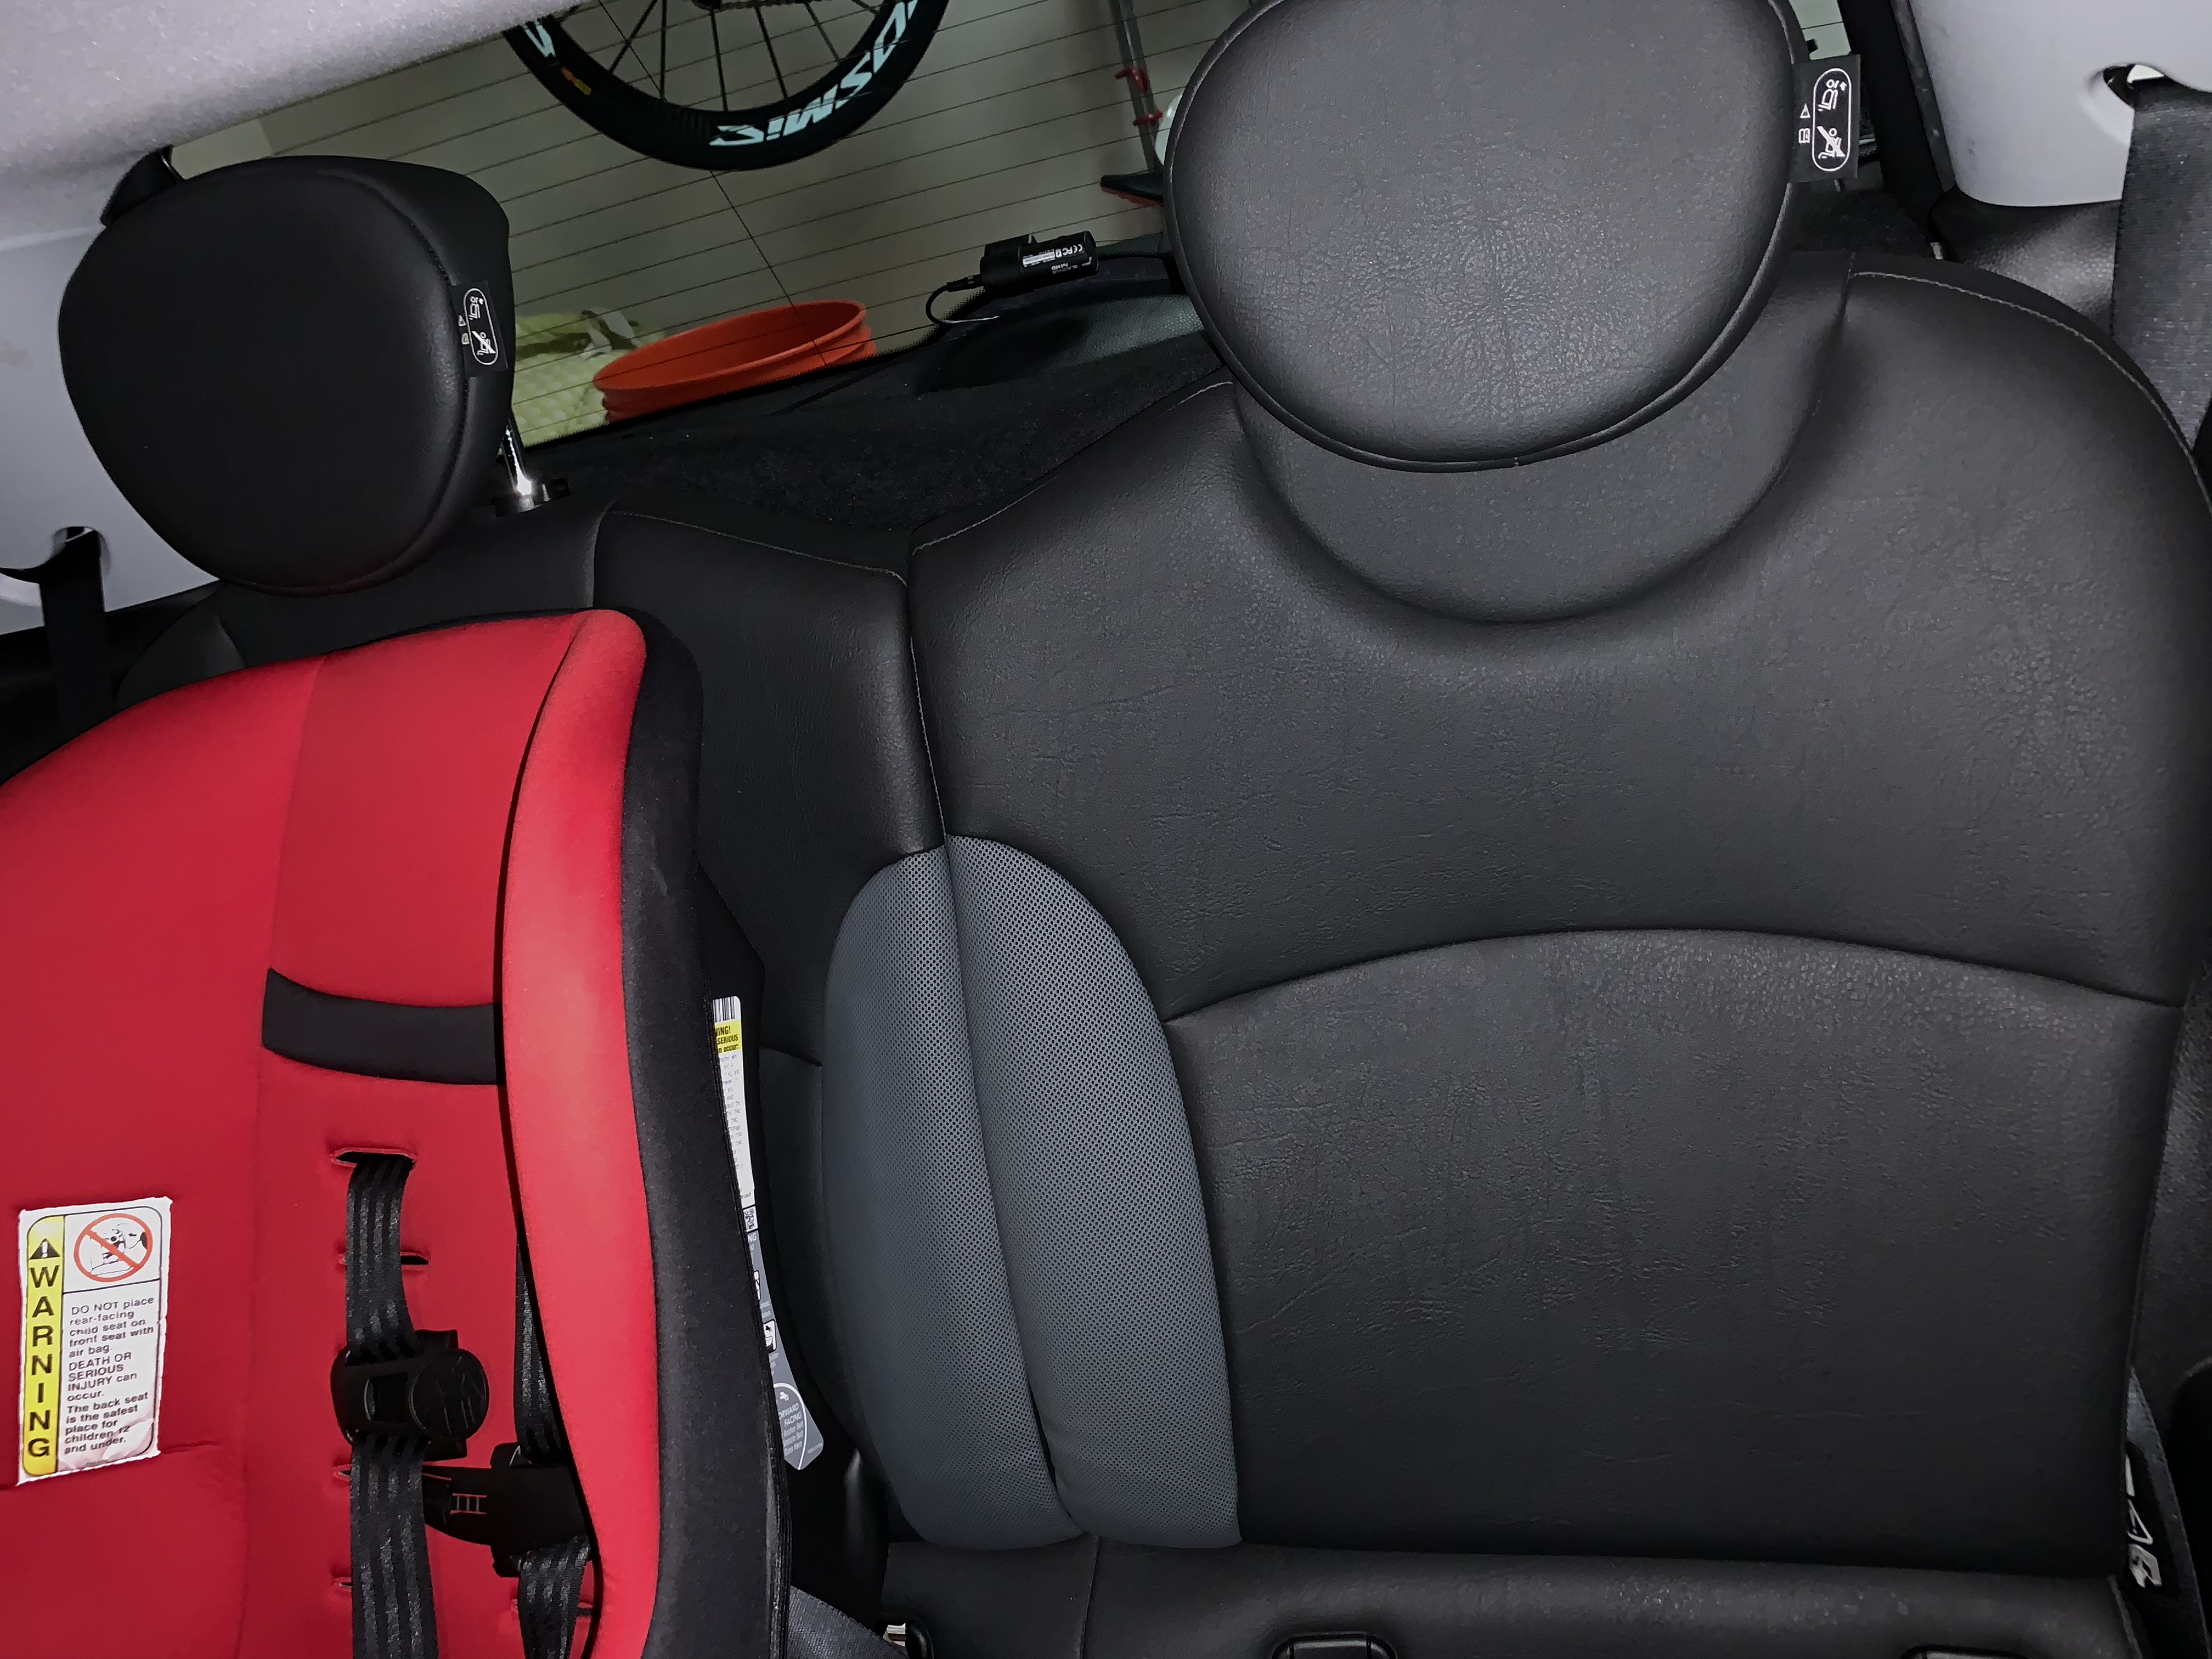 FS:: R56 Leatherette Seats - North American Motoring